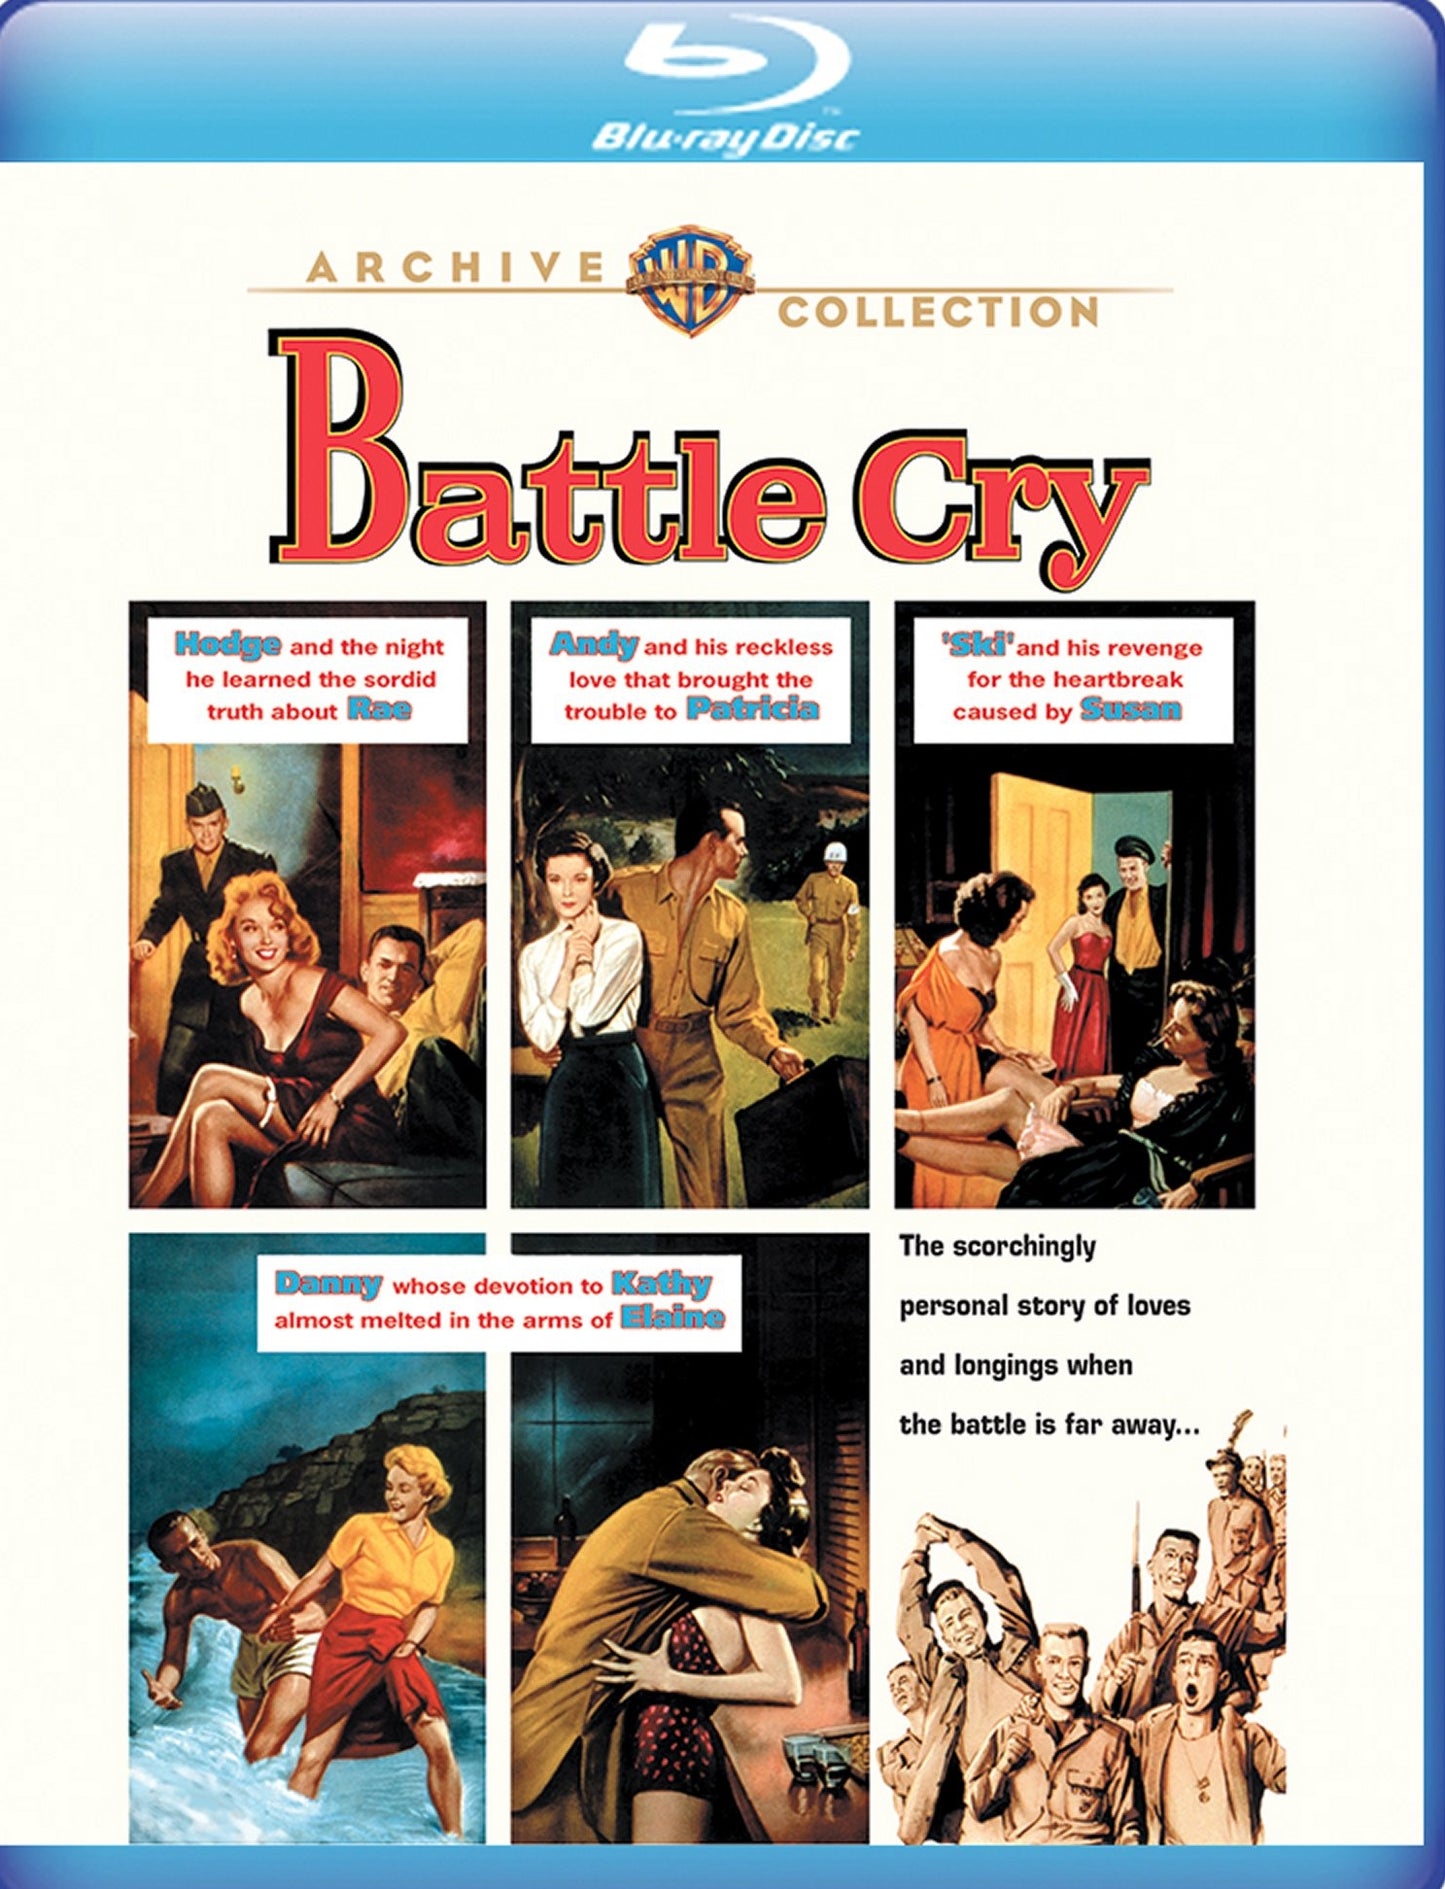 Battle Cry [Blu-ray] cover art